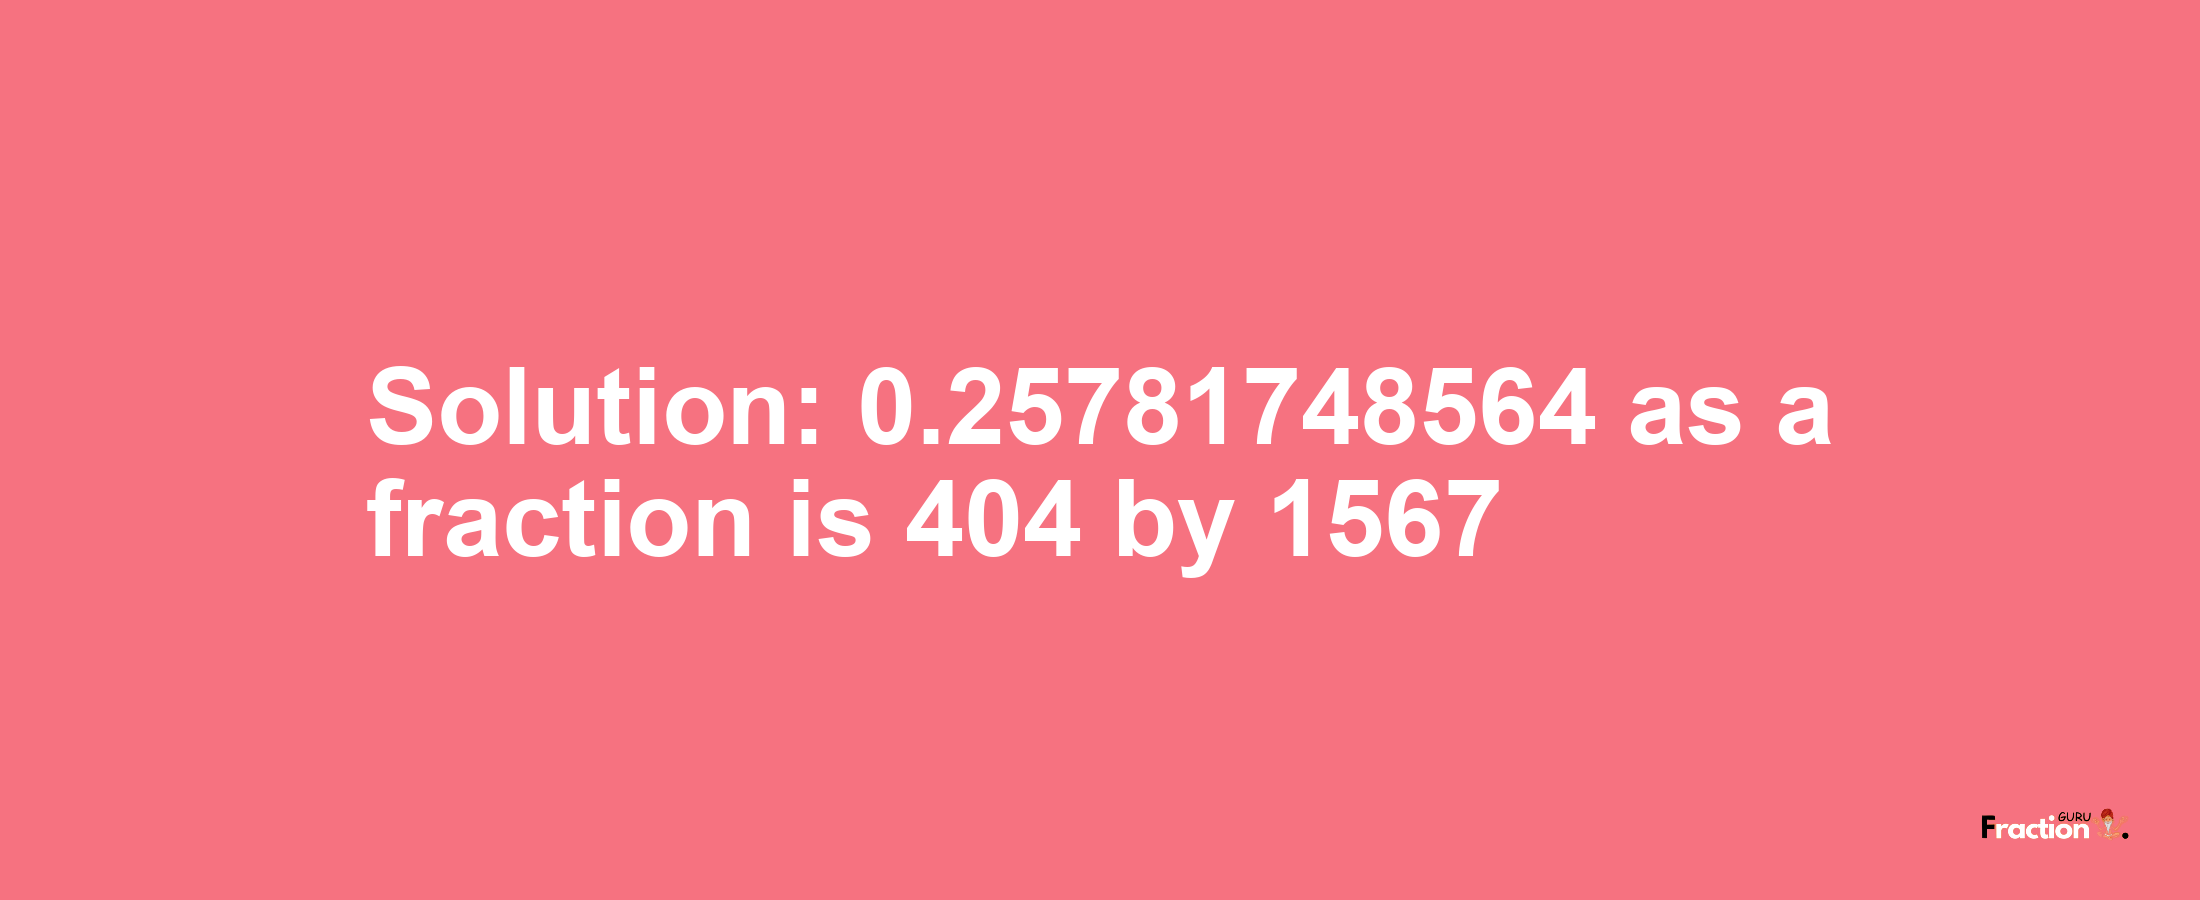 Solution:0.25781748564 as a fraction is 404/1567